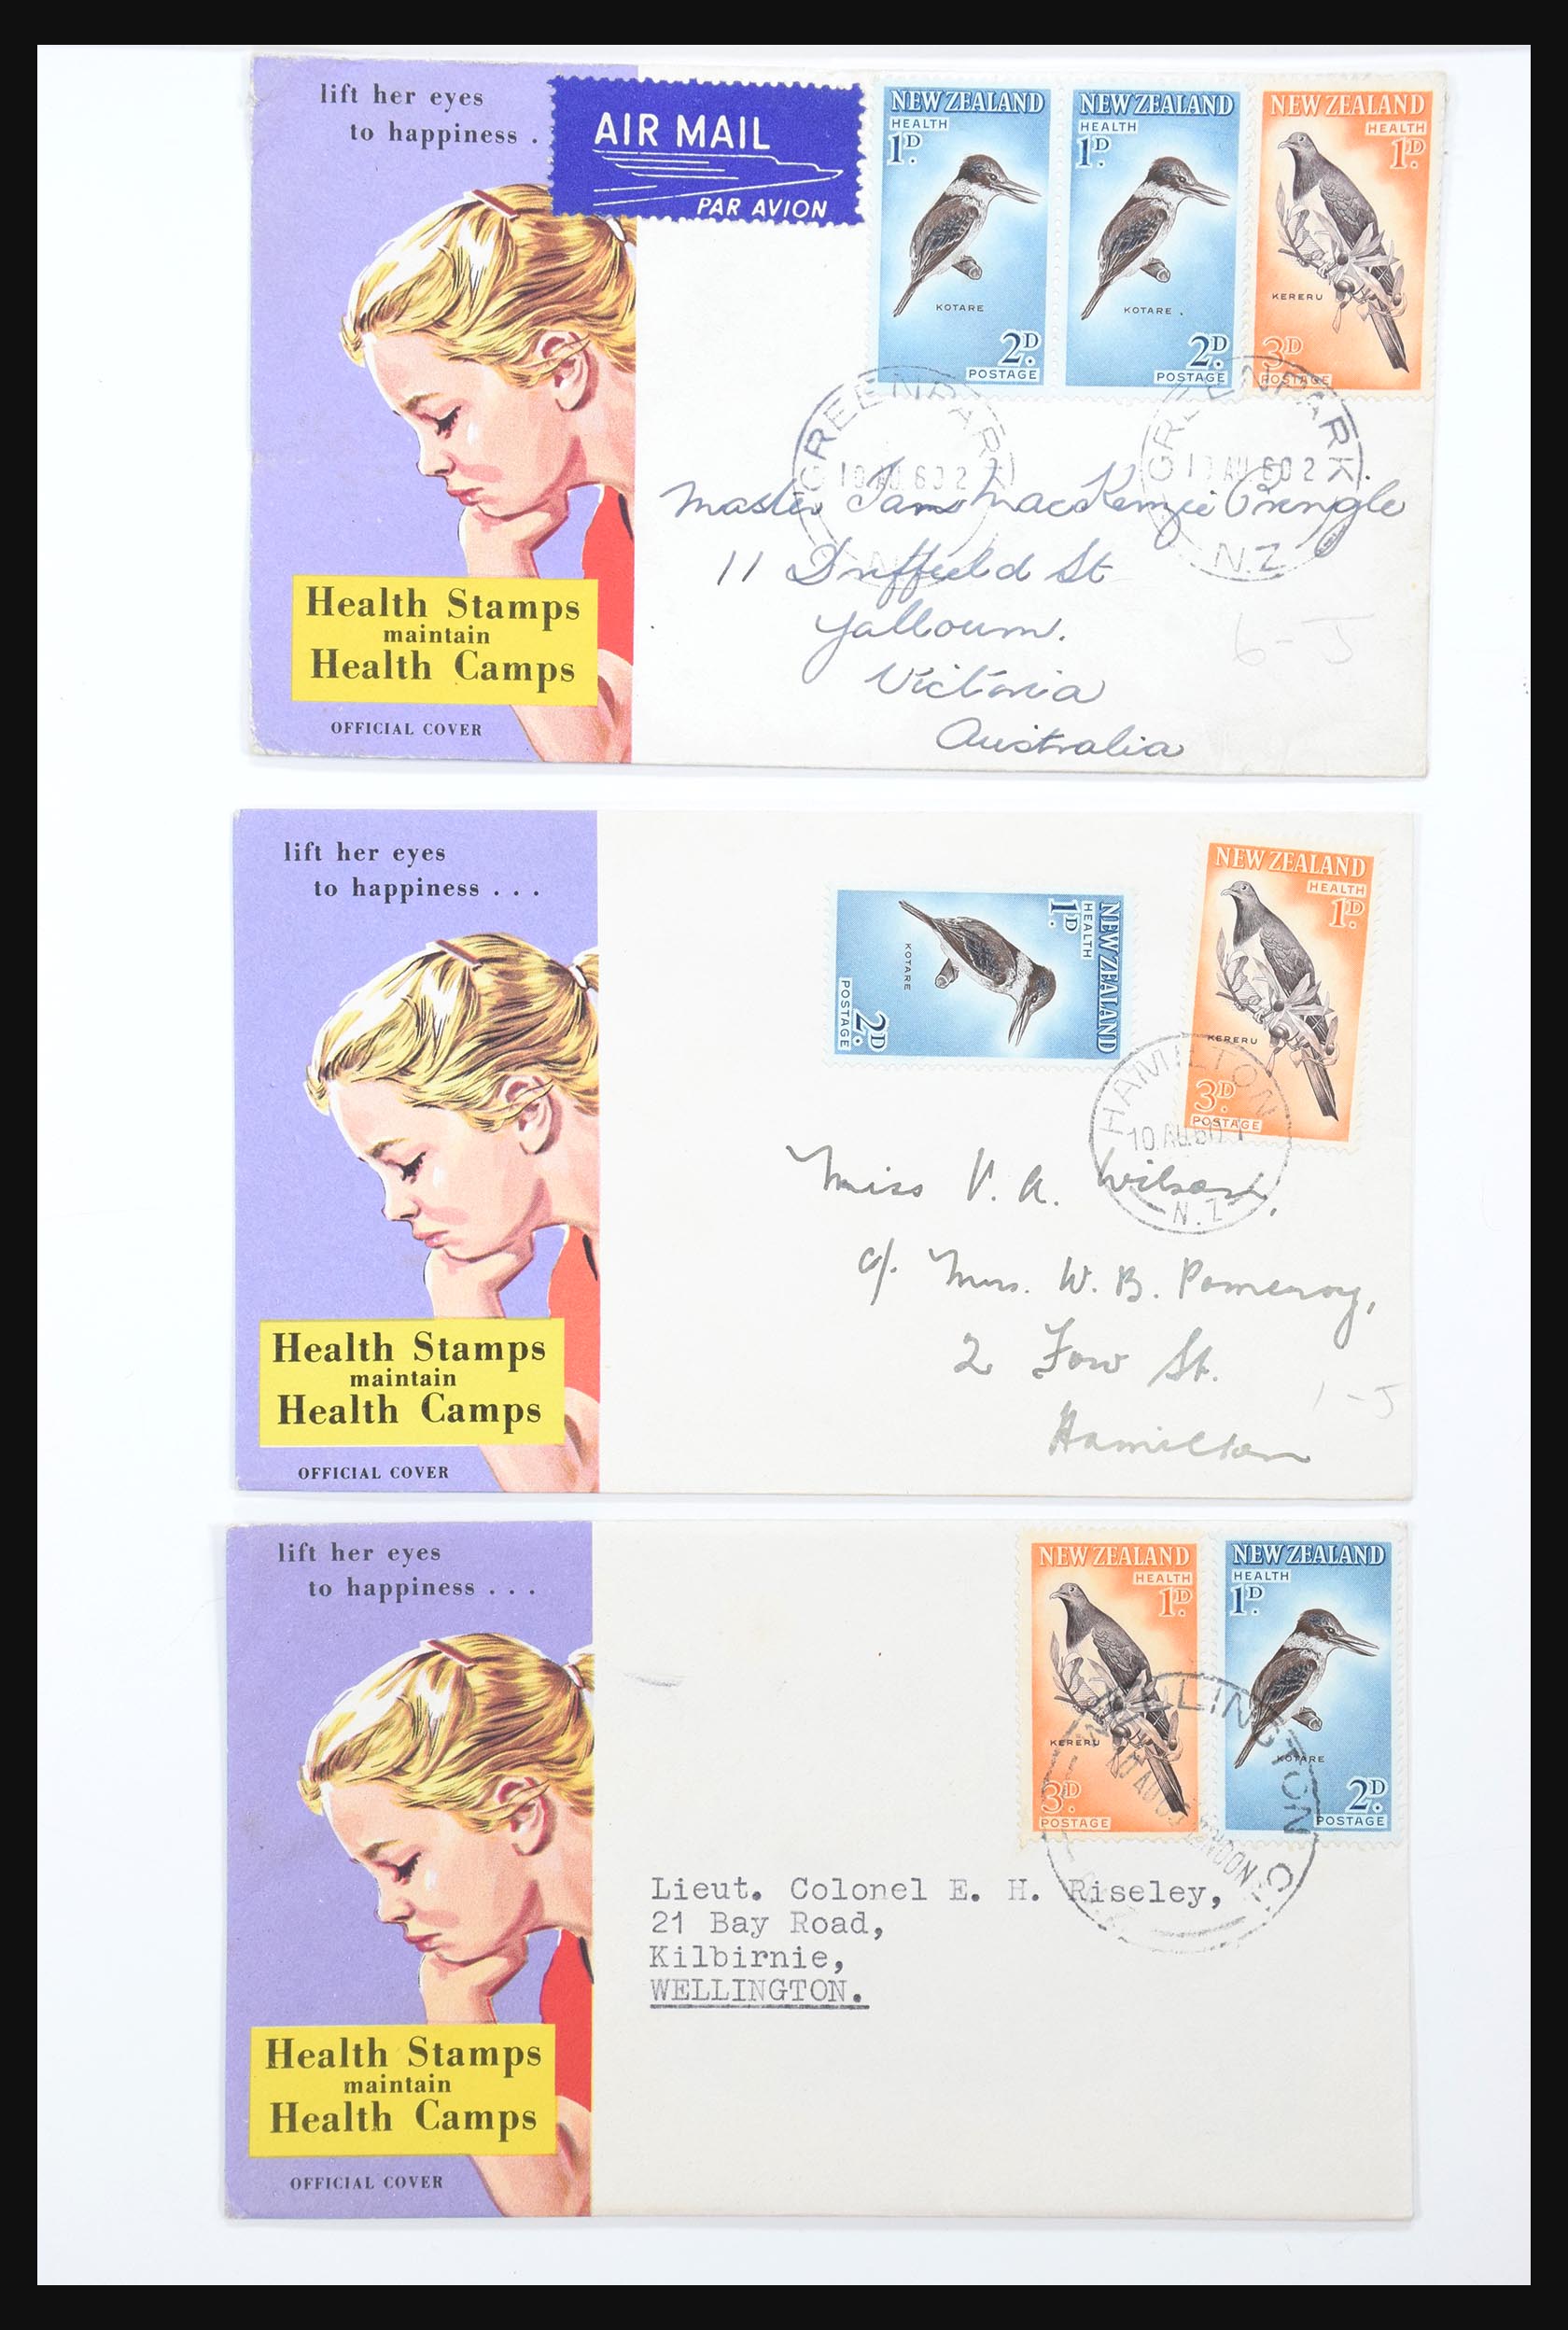 30821 009 - 30821 New Zealand FDC's 1960-1971.